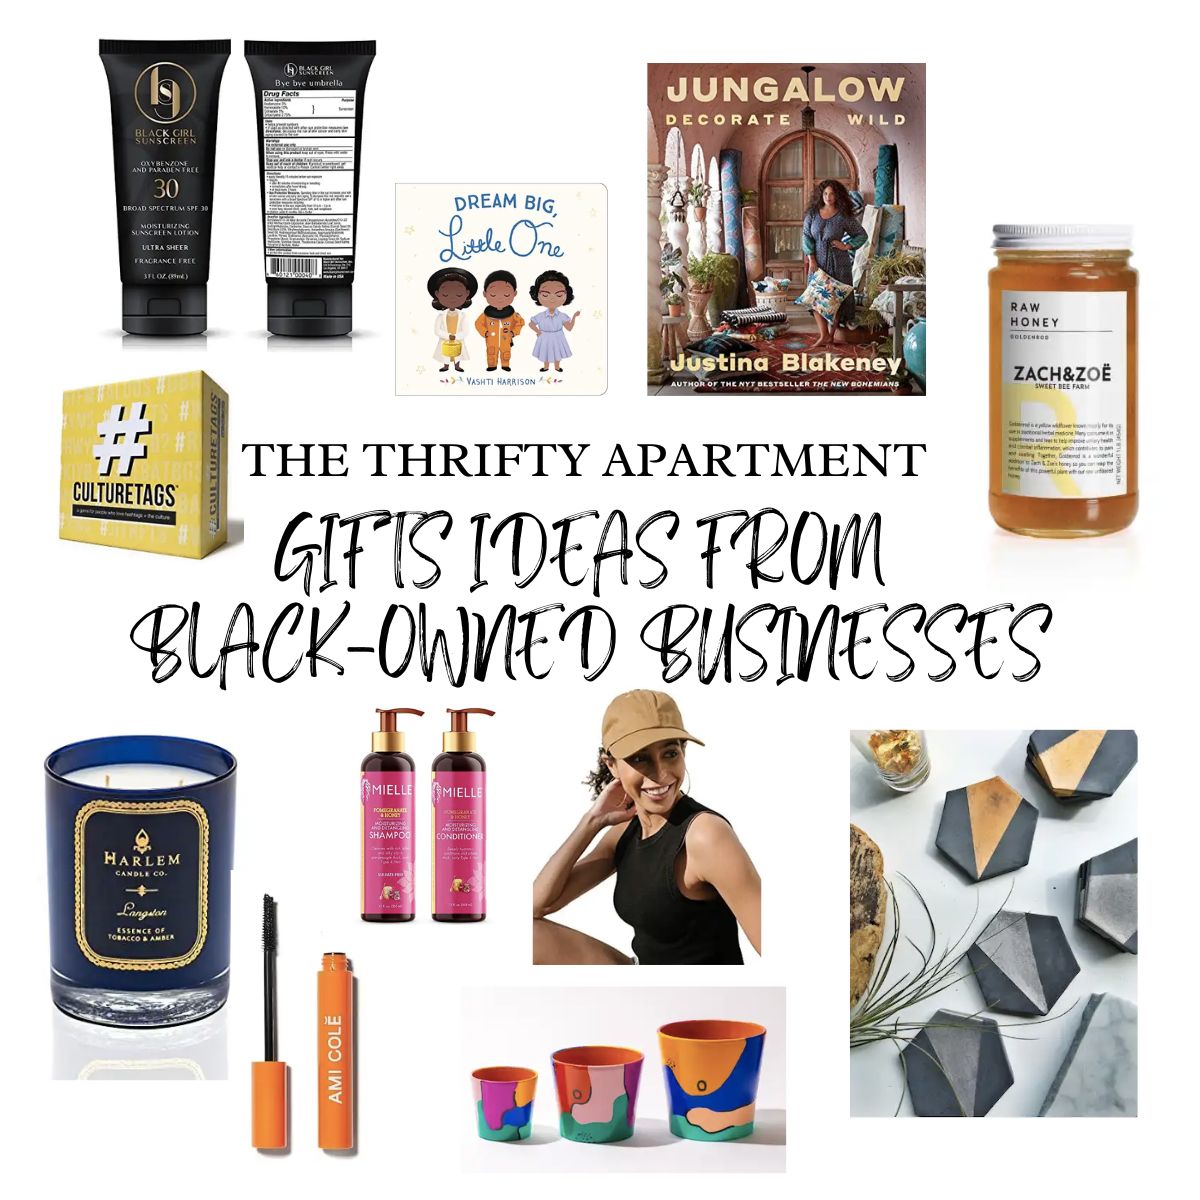 11 Gift Ideas Under $50 from Black-Owned Businesses